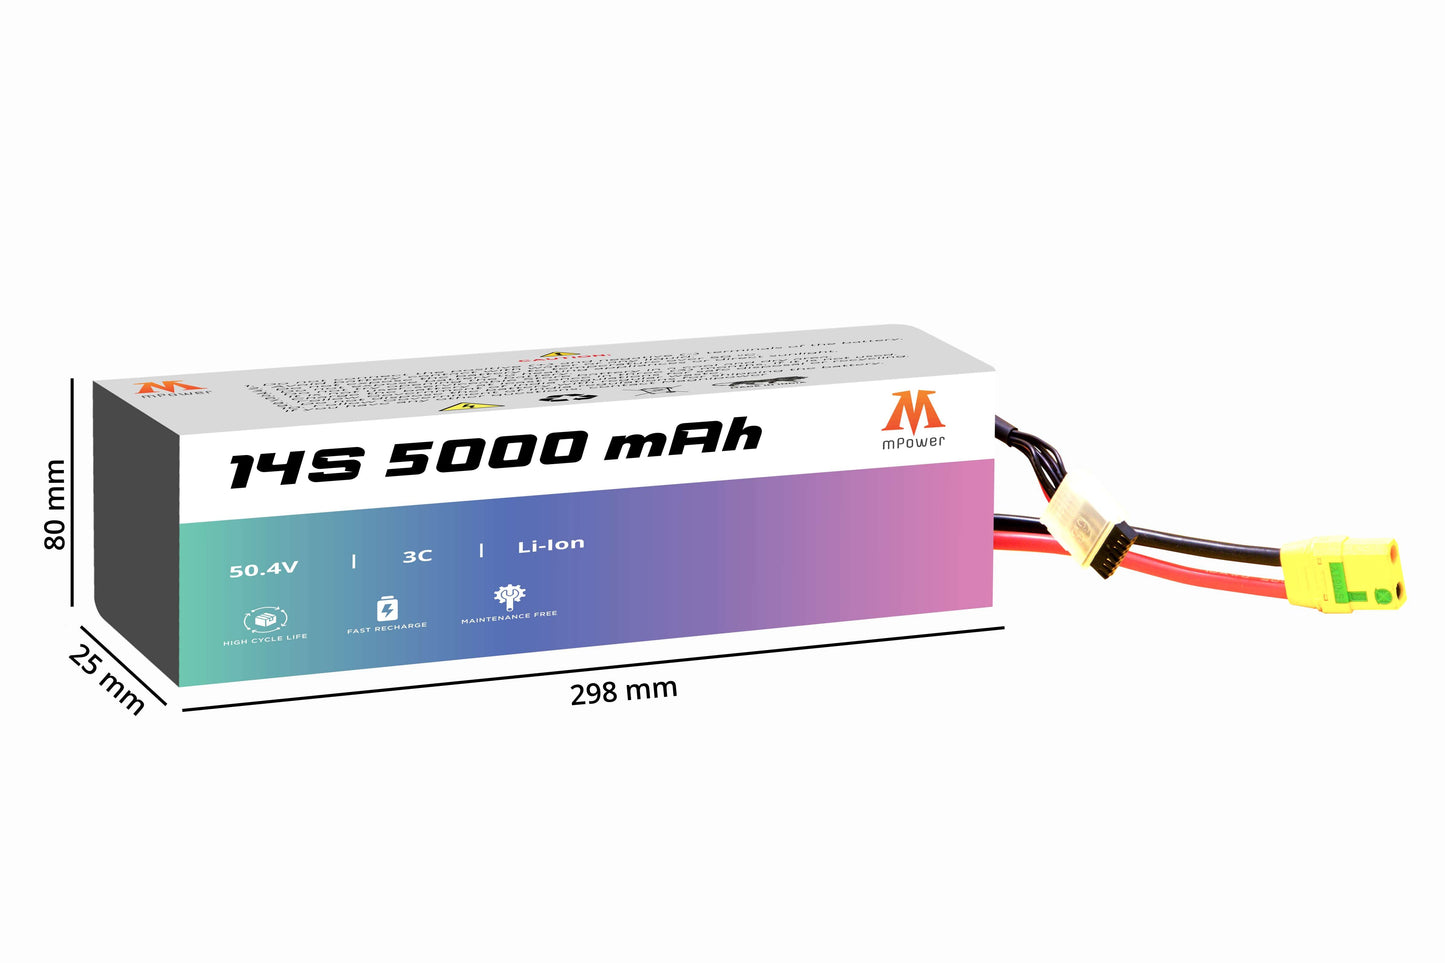 mPower 14S 5000mAh Lithium-Ion Battery for Surveillance Drones